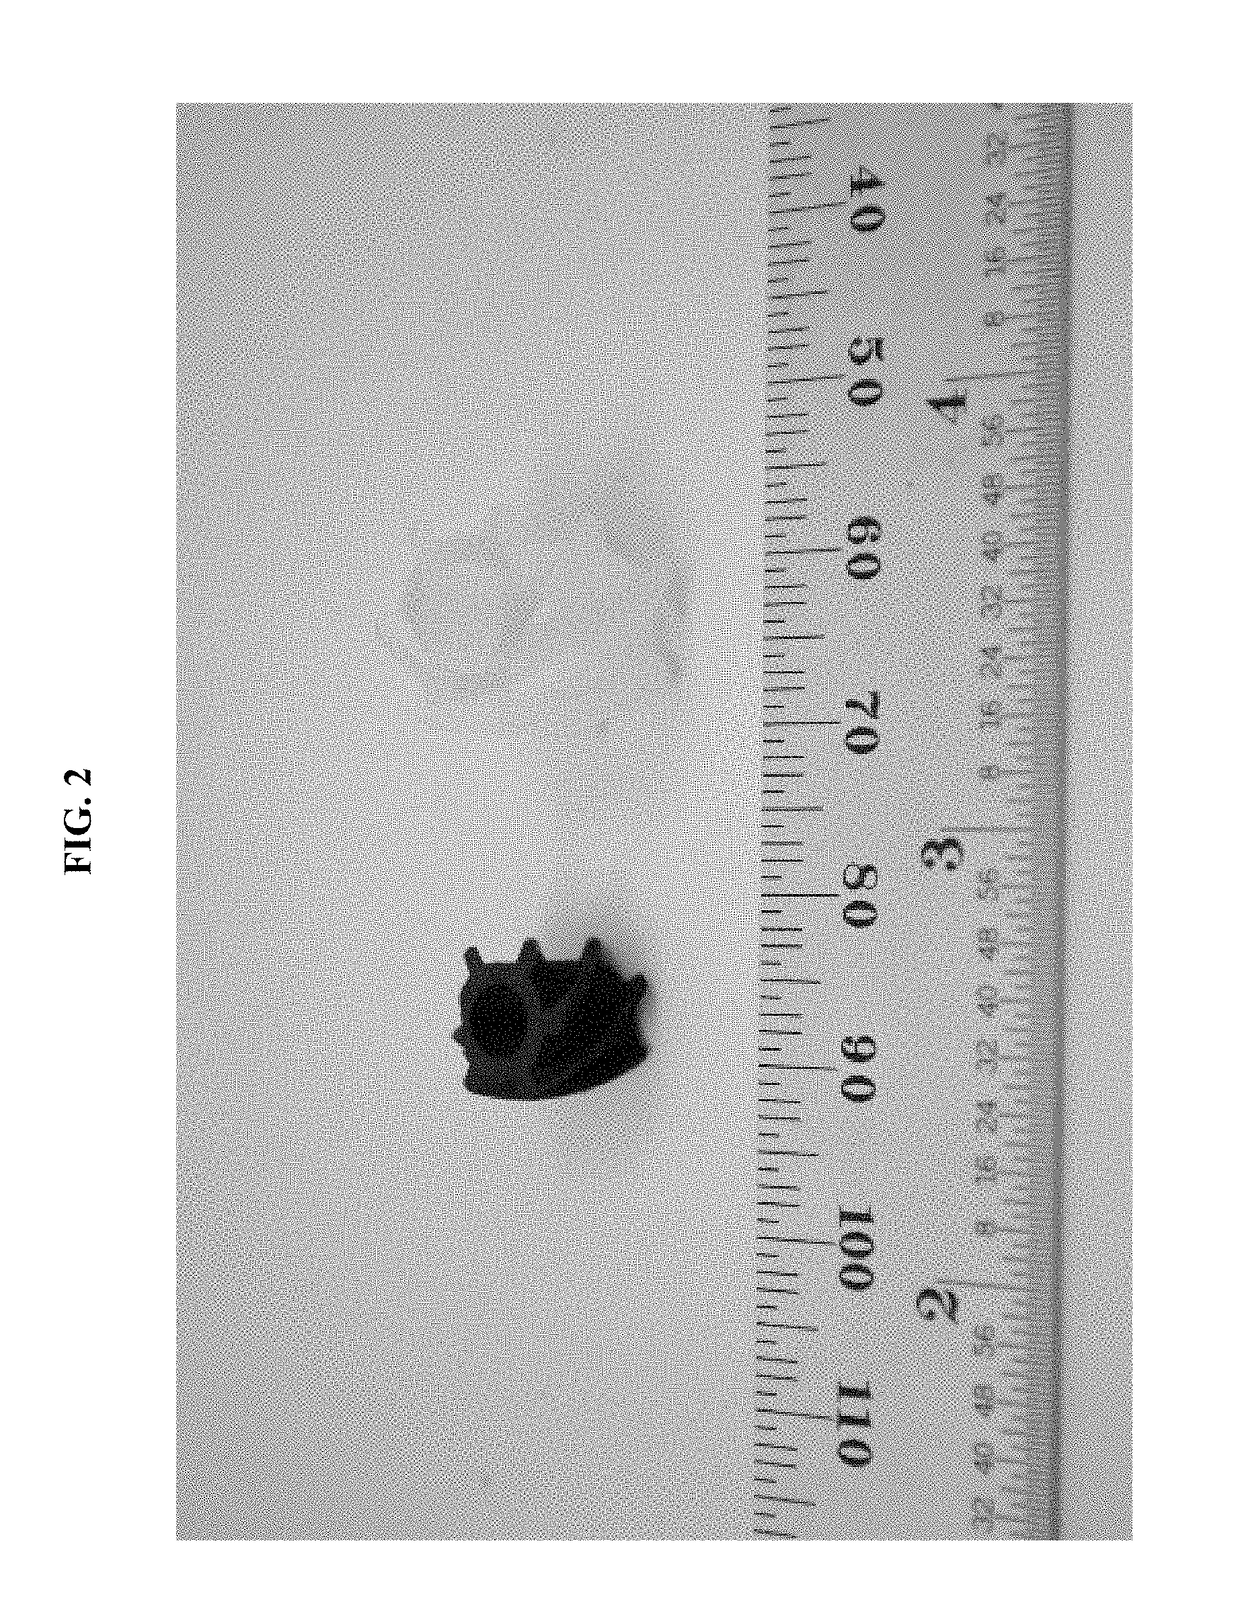 Formulations with active functional additives for 3D printing of preceramic polymers, and methods of 3D-printing the formulations